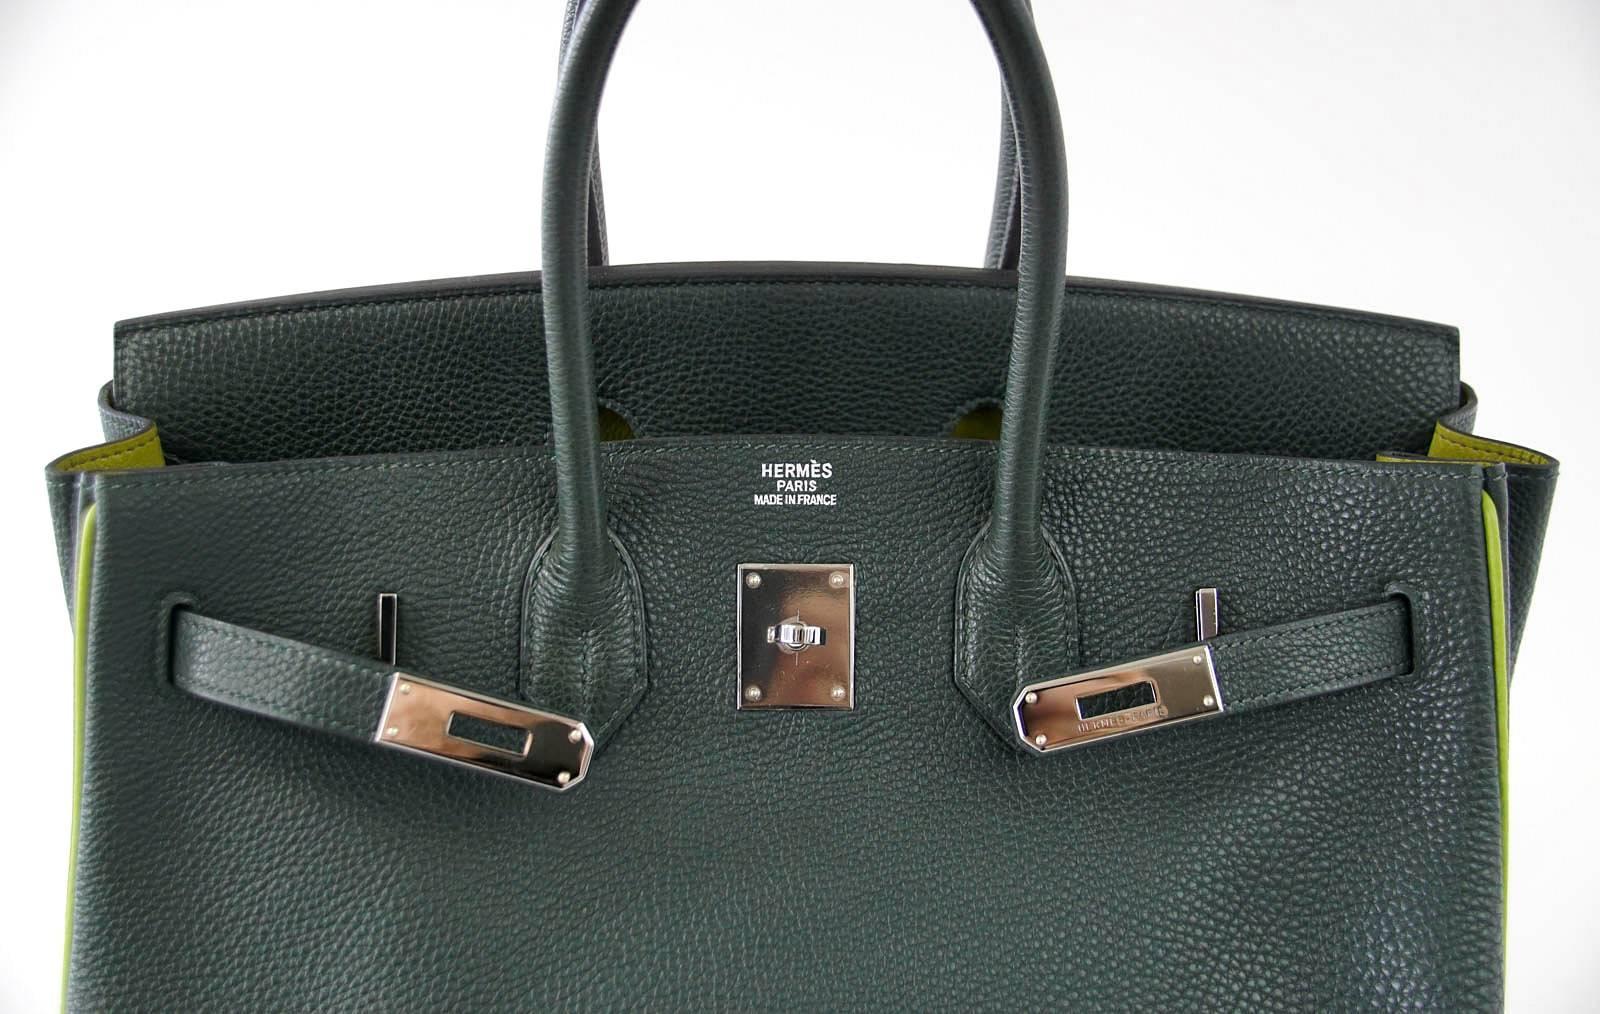 Guaranteed authentic special order rich Vert Fonce with Vert Anis trim and Chartreuse interior.
Rare Ruthenium hardware. Togo leather.
A beautiful year round bag. 
Just returned from TLC at Hermes Spa.
Clean corners, handles body and interior. 